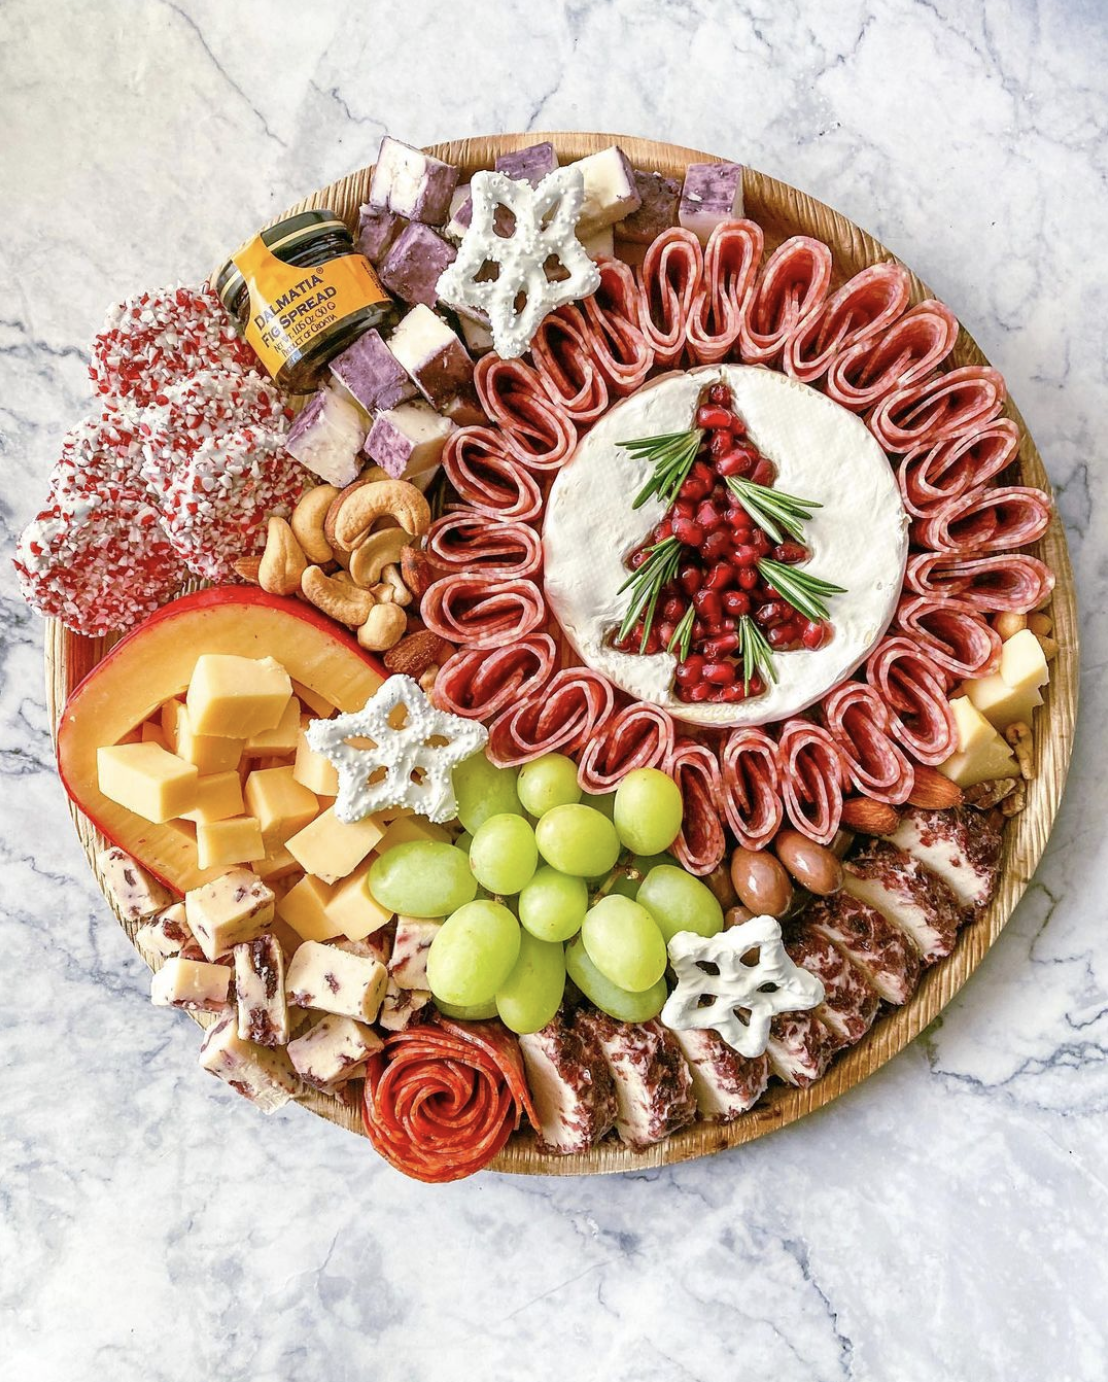 Love this Christmas charcuterie board with tree cutout of brie cheese 